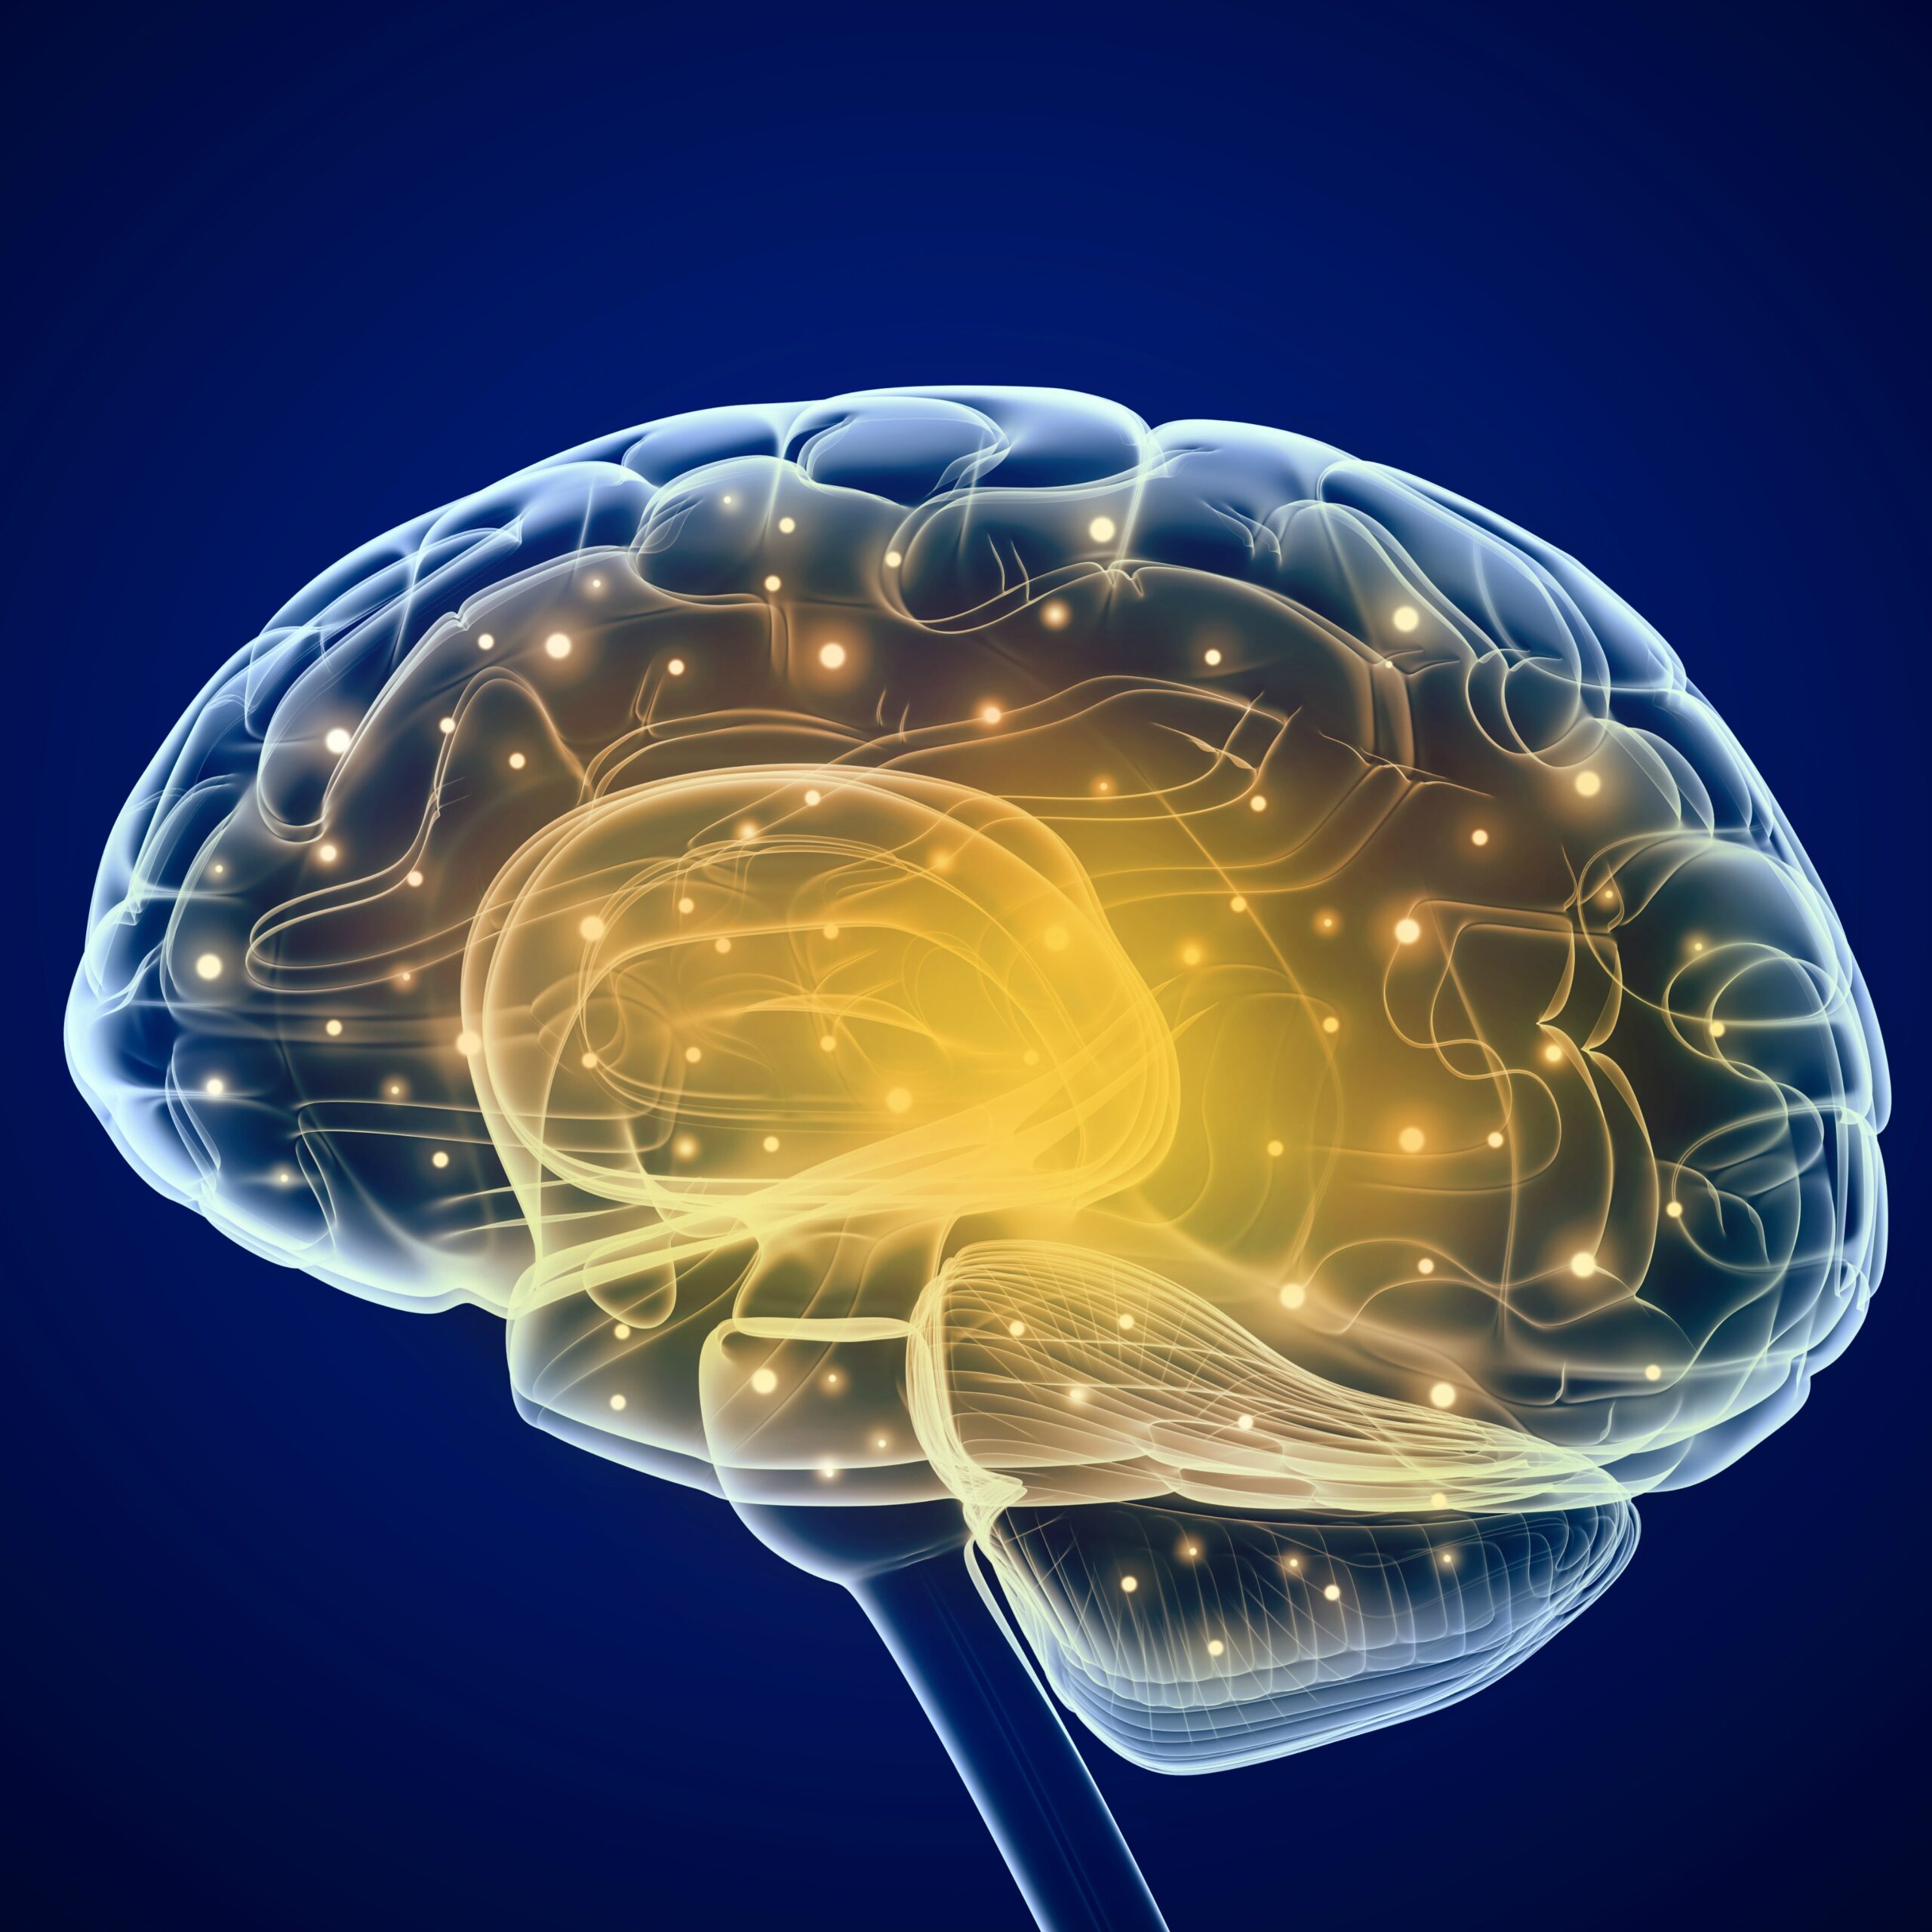 Negative Emotion Perception Altered With Magnetic Brain Stimulation